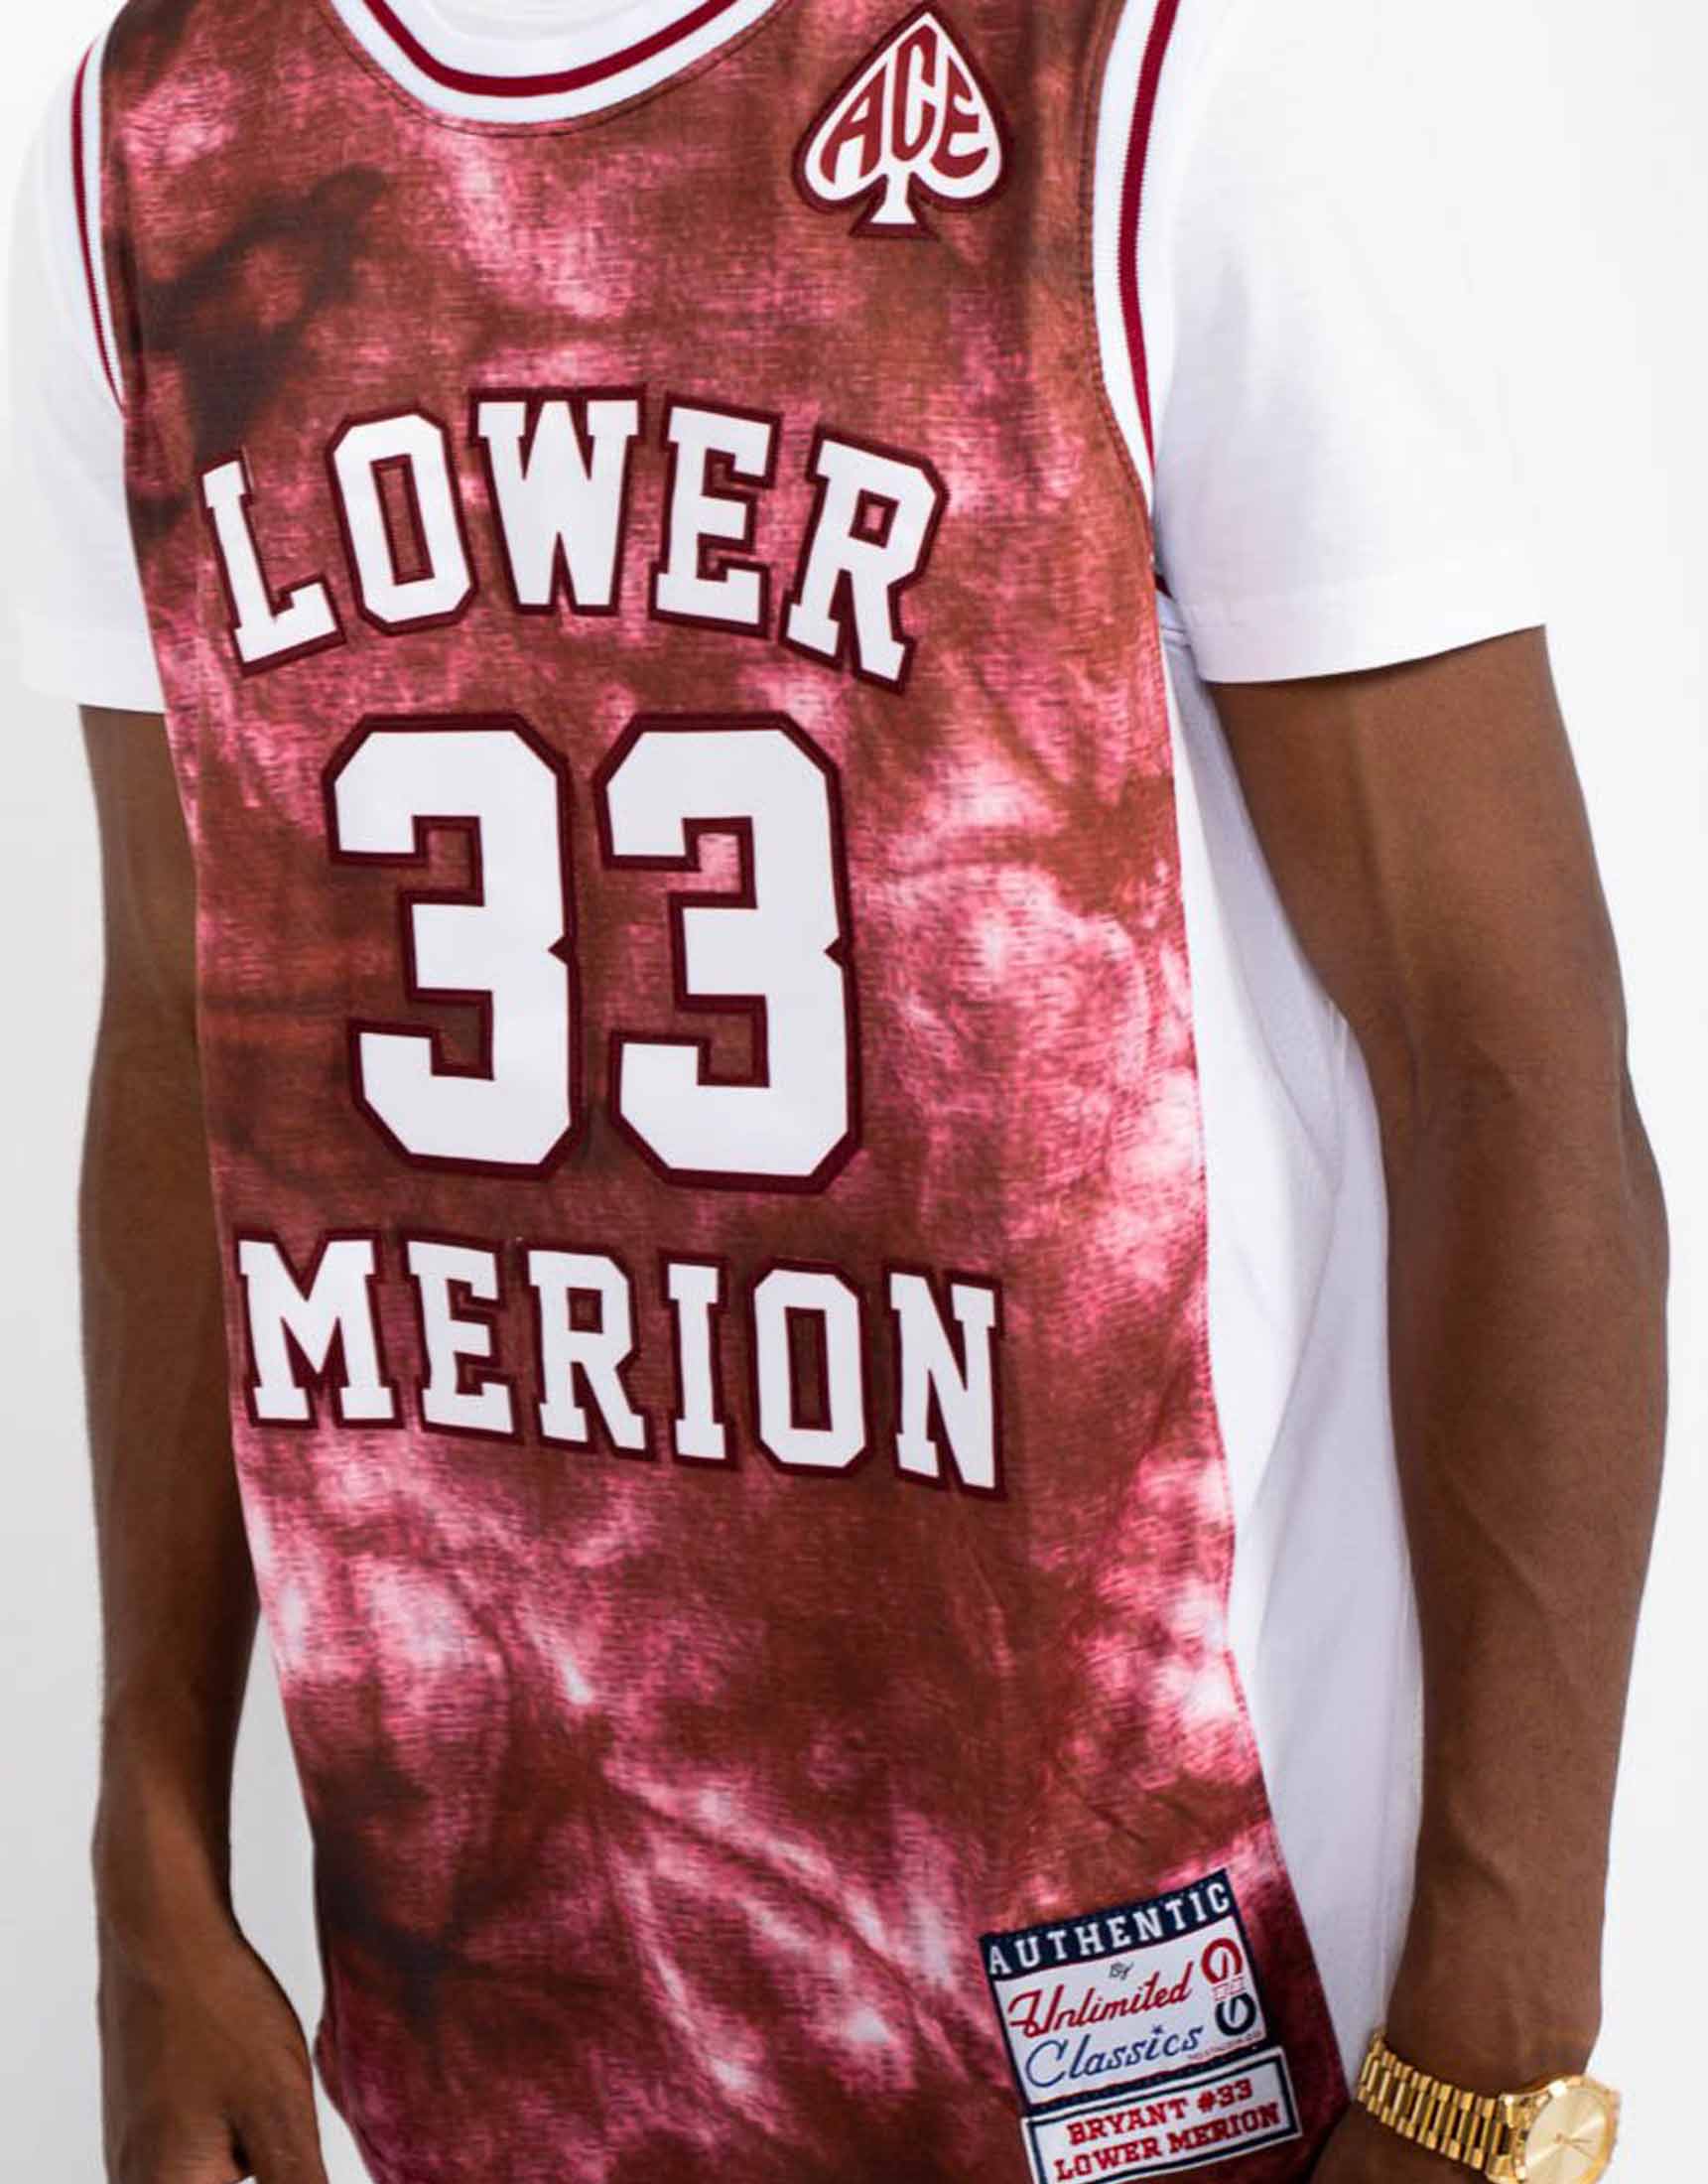 kobe bryant lower merion jersey authentic